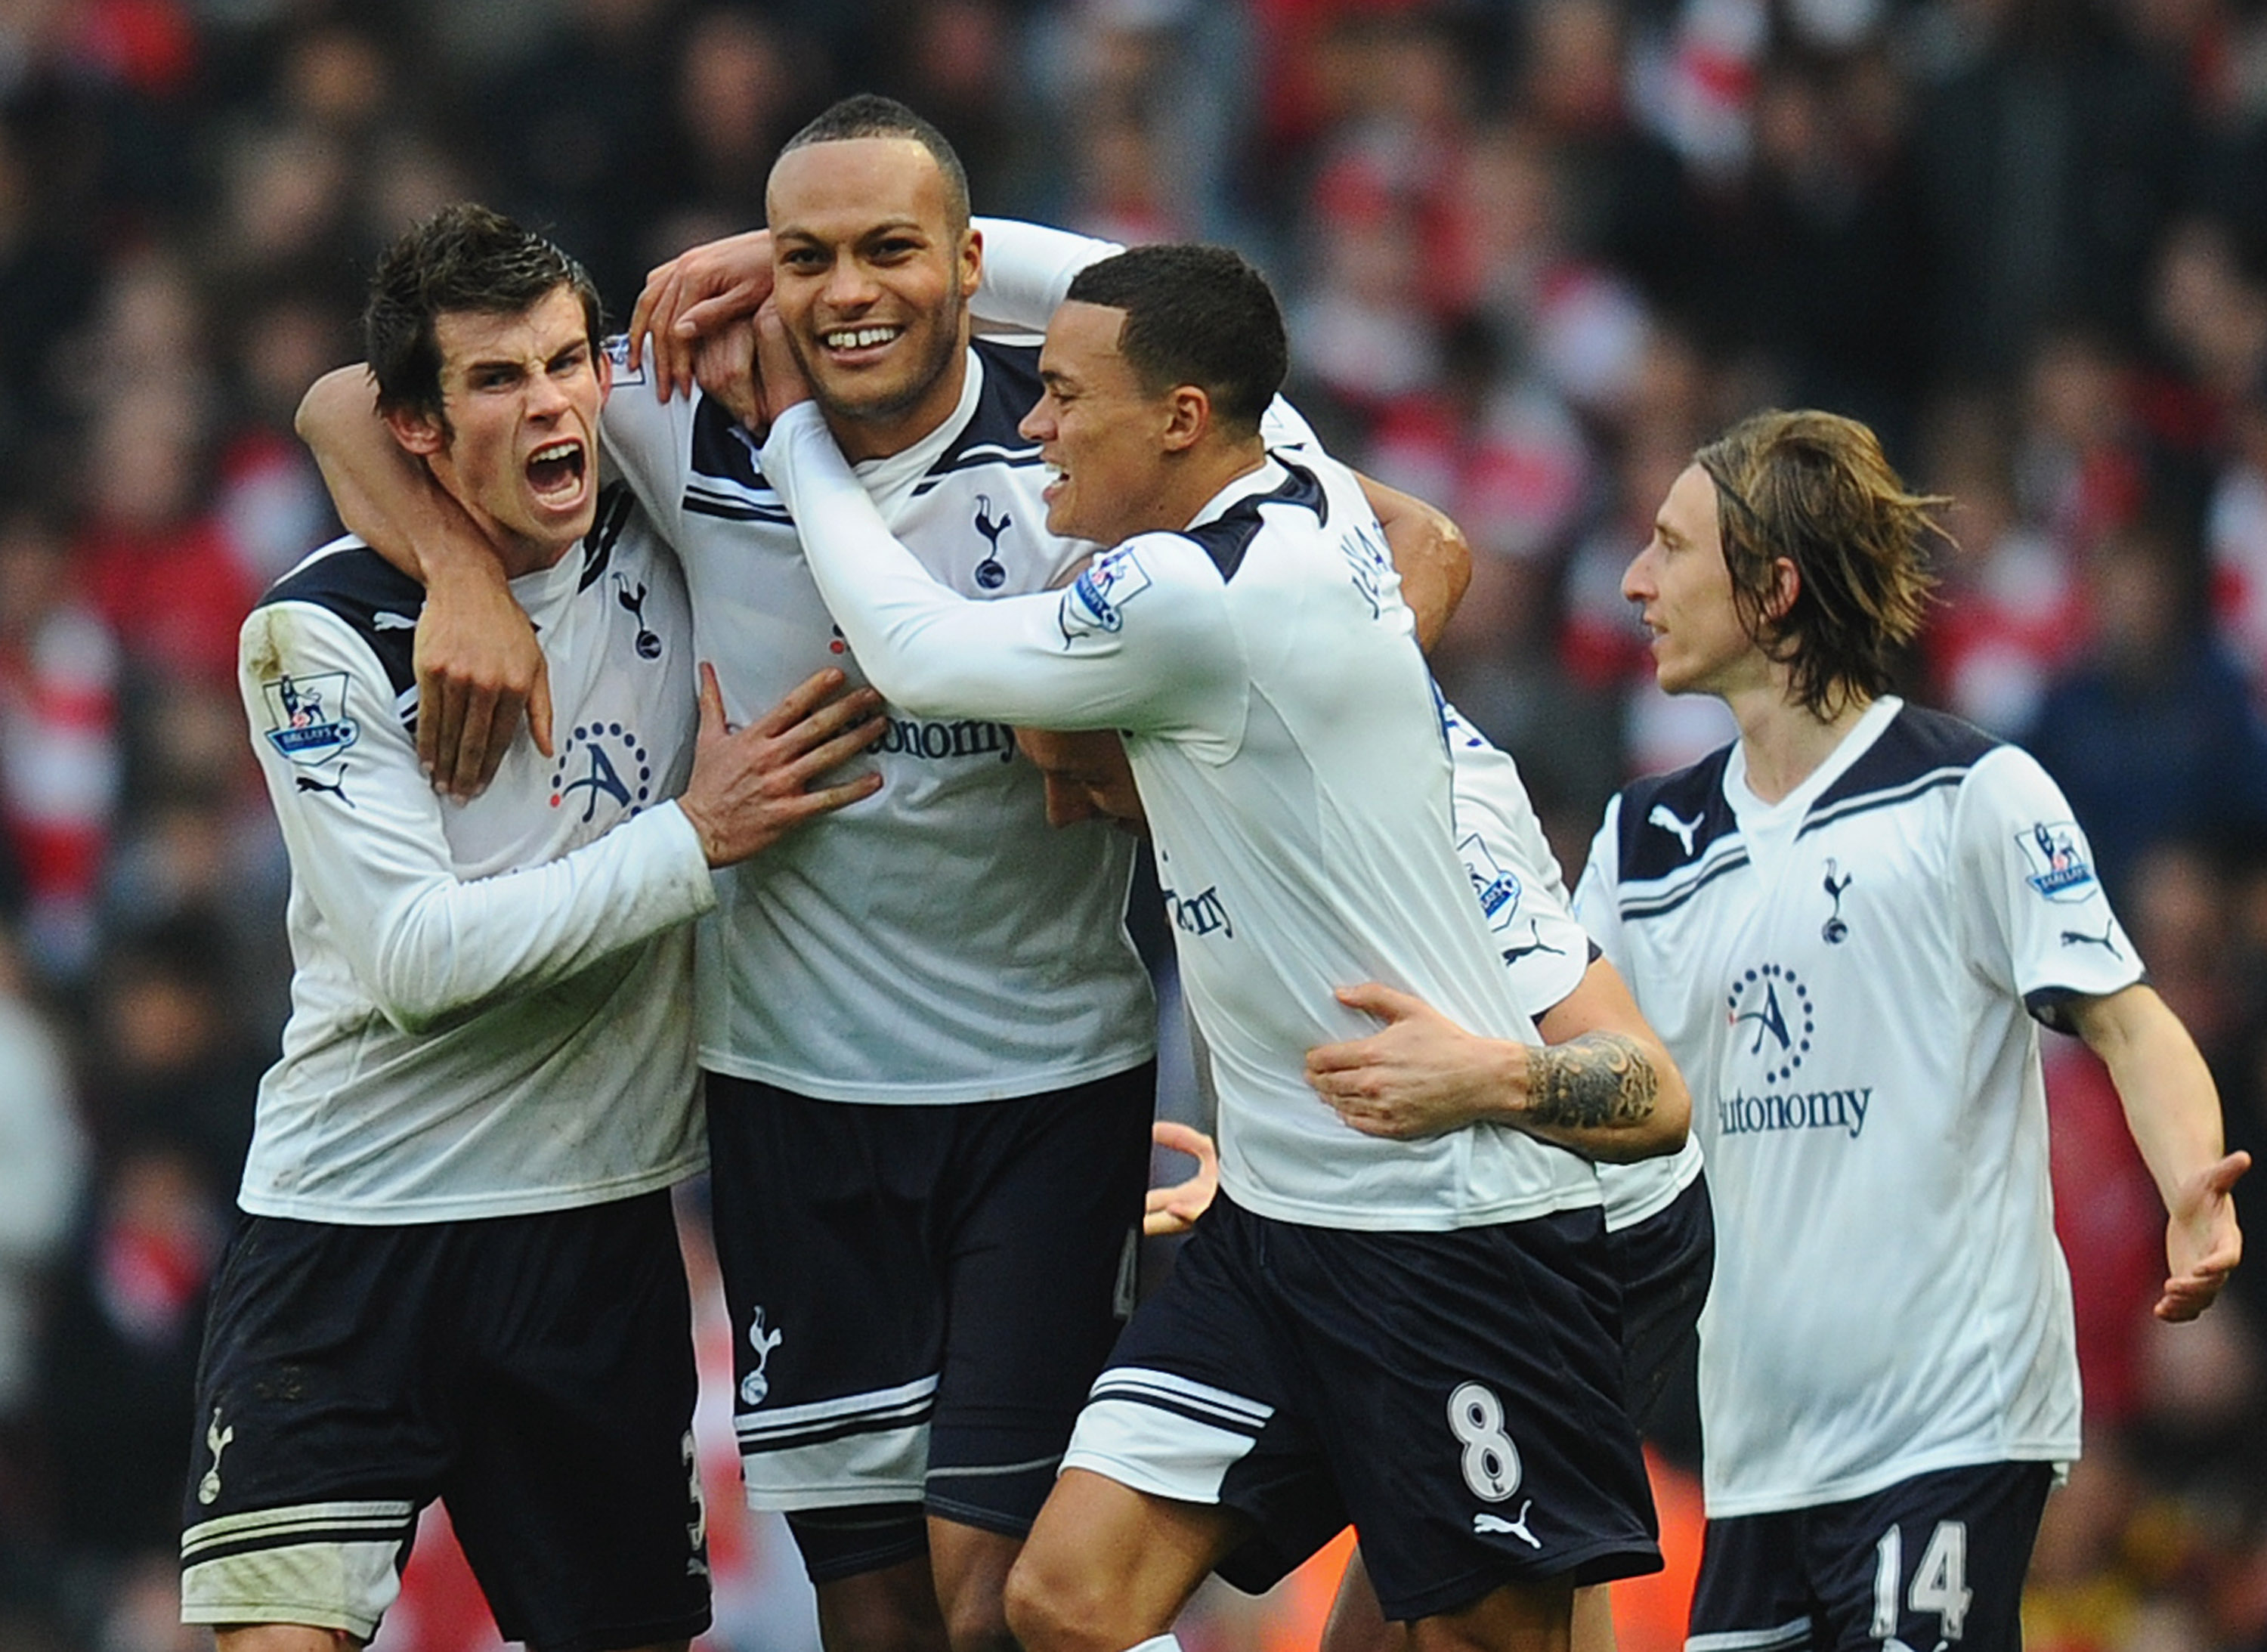 LONDON, ENGLAND - NOVEMBER 20:  Younes Kaboul of Tottenham celebrates with team mates Gareth Bale and Jermaine Jenas after scoring the winner during the Barclays Premier League match between Arsenal and Tottenham Hotspur at the Emirates Stadium on Novembe